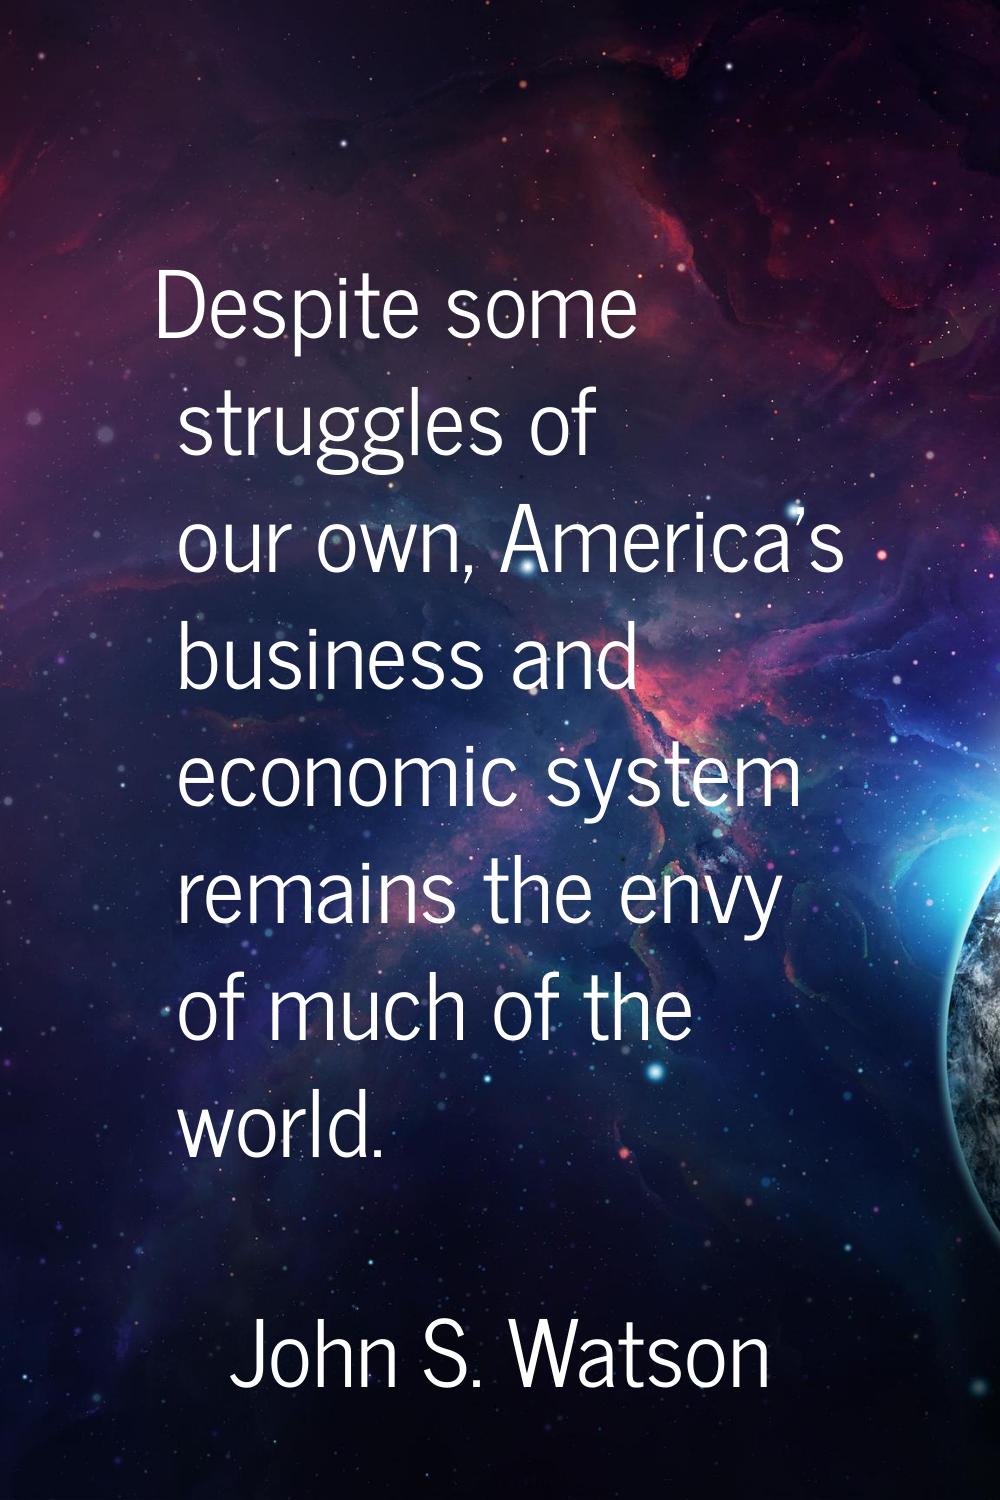 Despite some struggles of our own, America's business and economic system remains the envy of much 